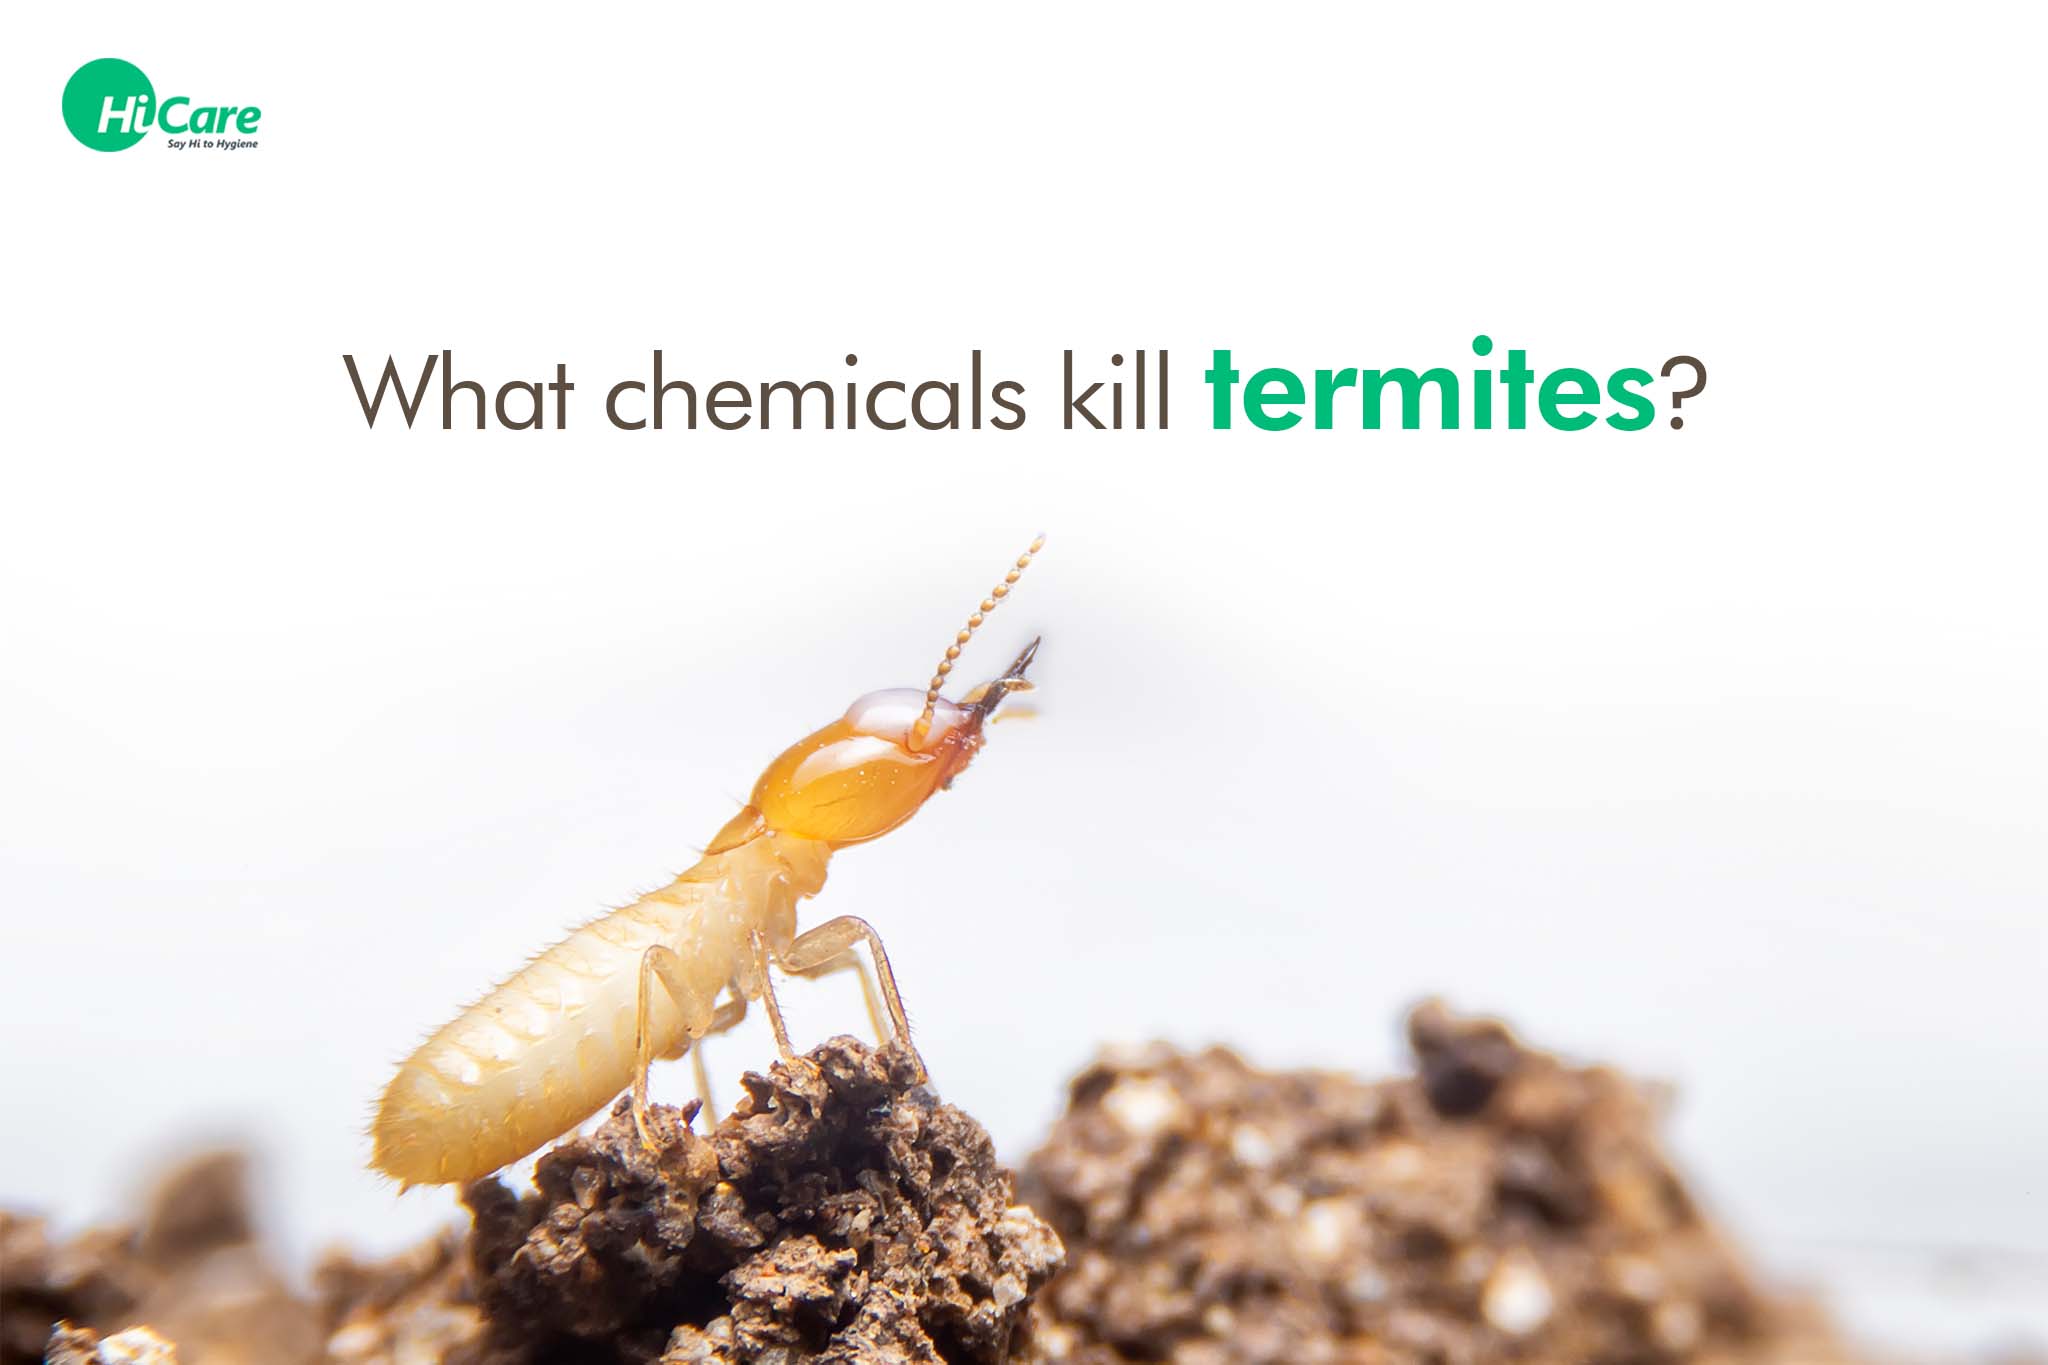 what chemicals kill termites?